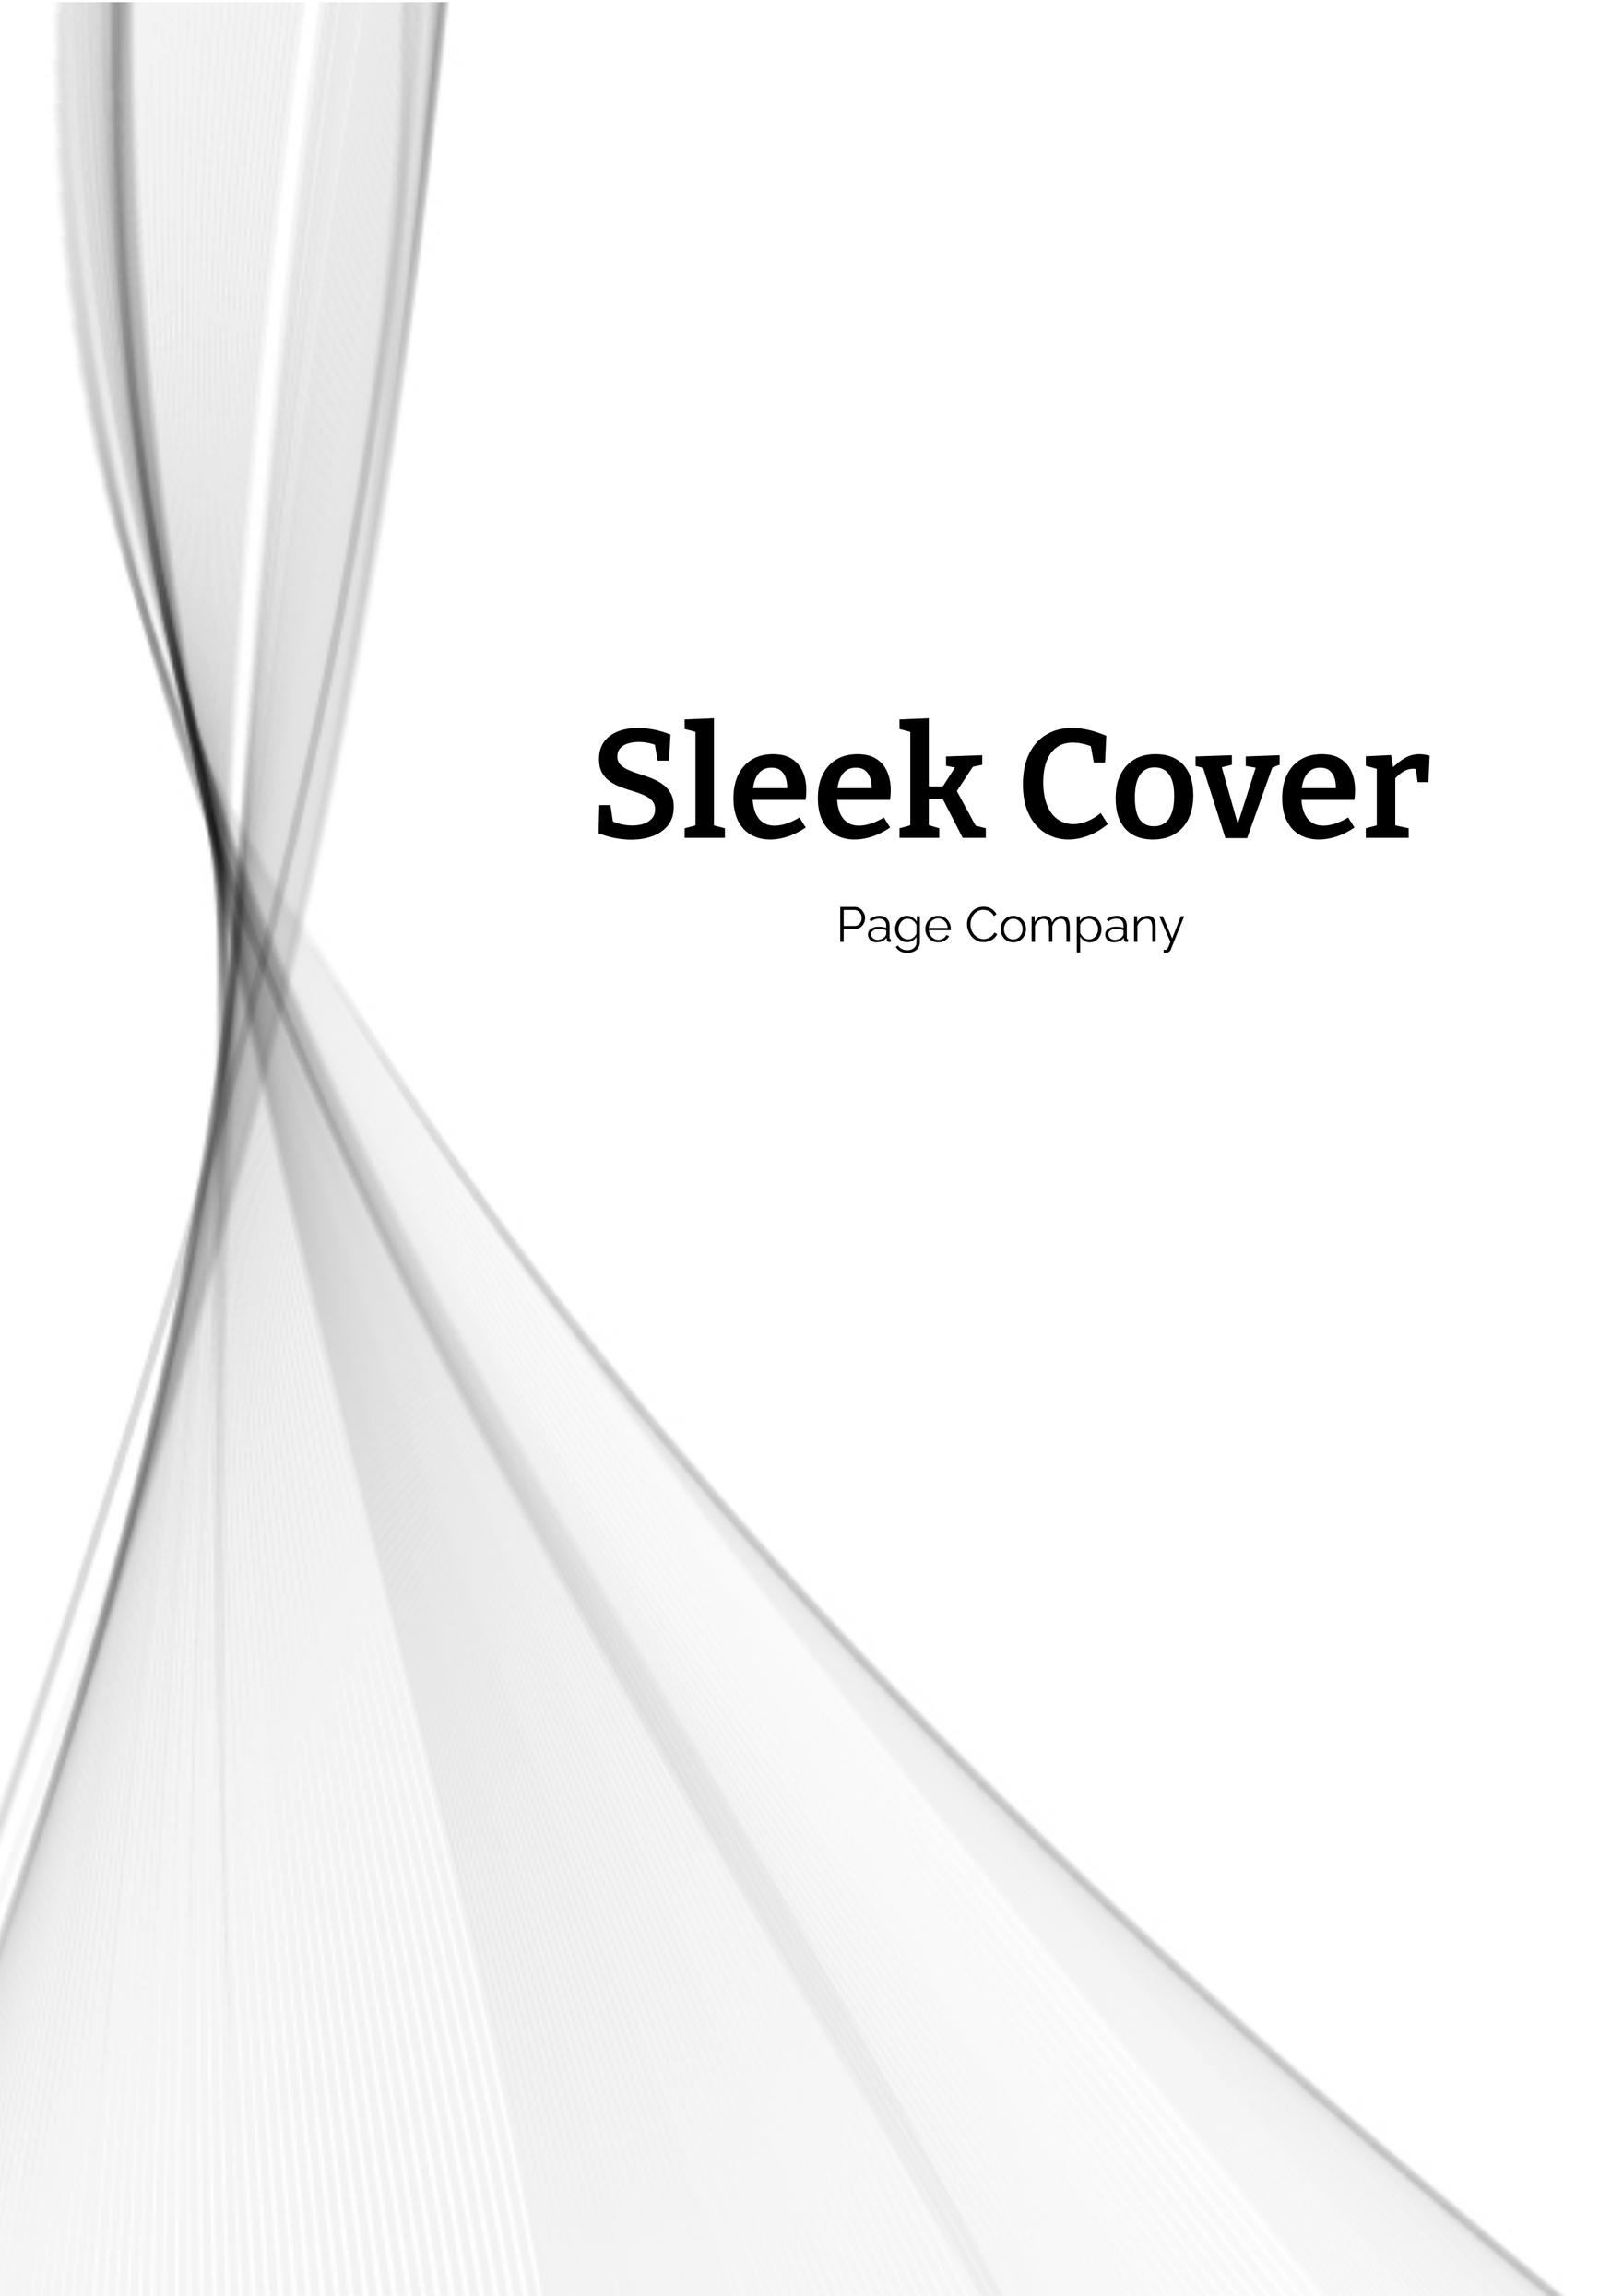 Sleek Cover Page Company Template